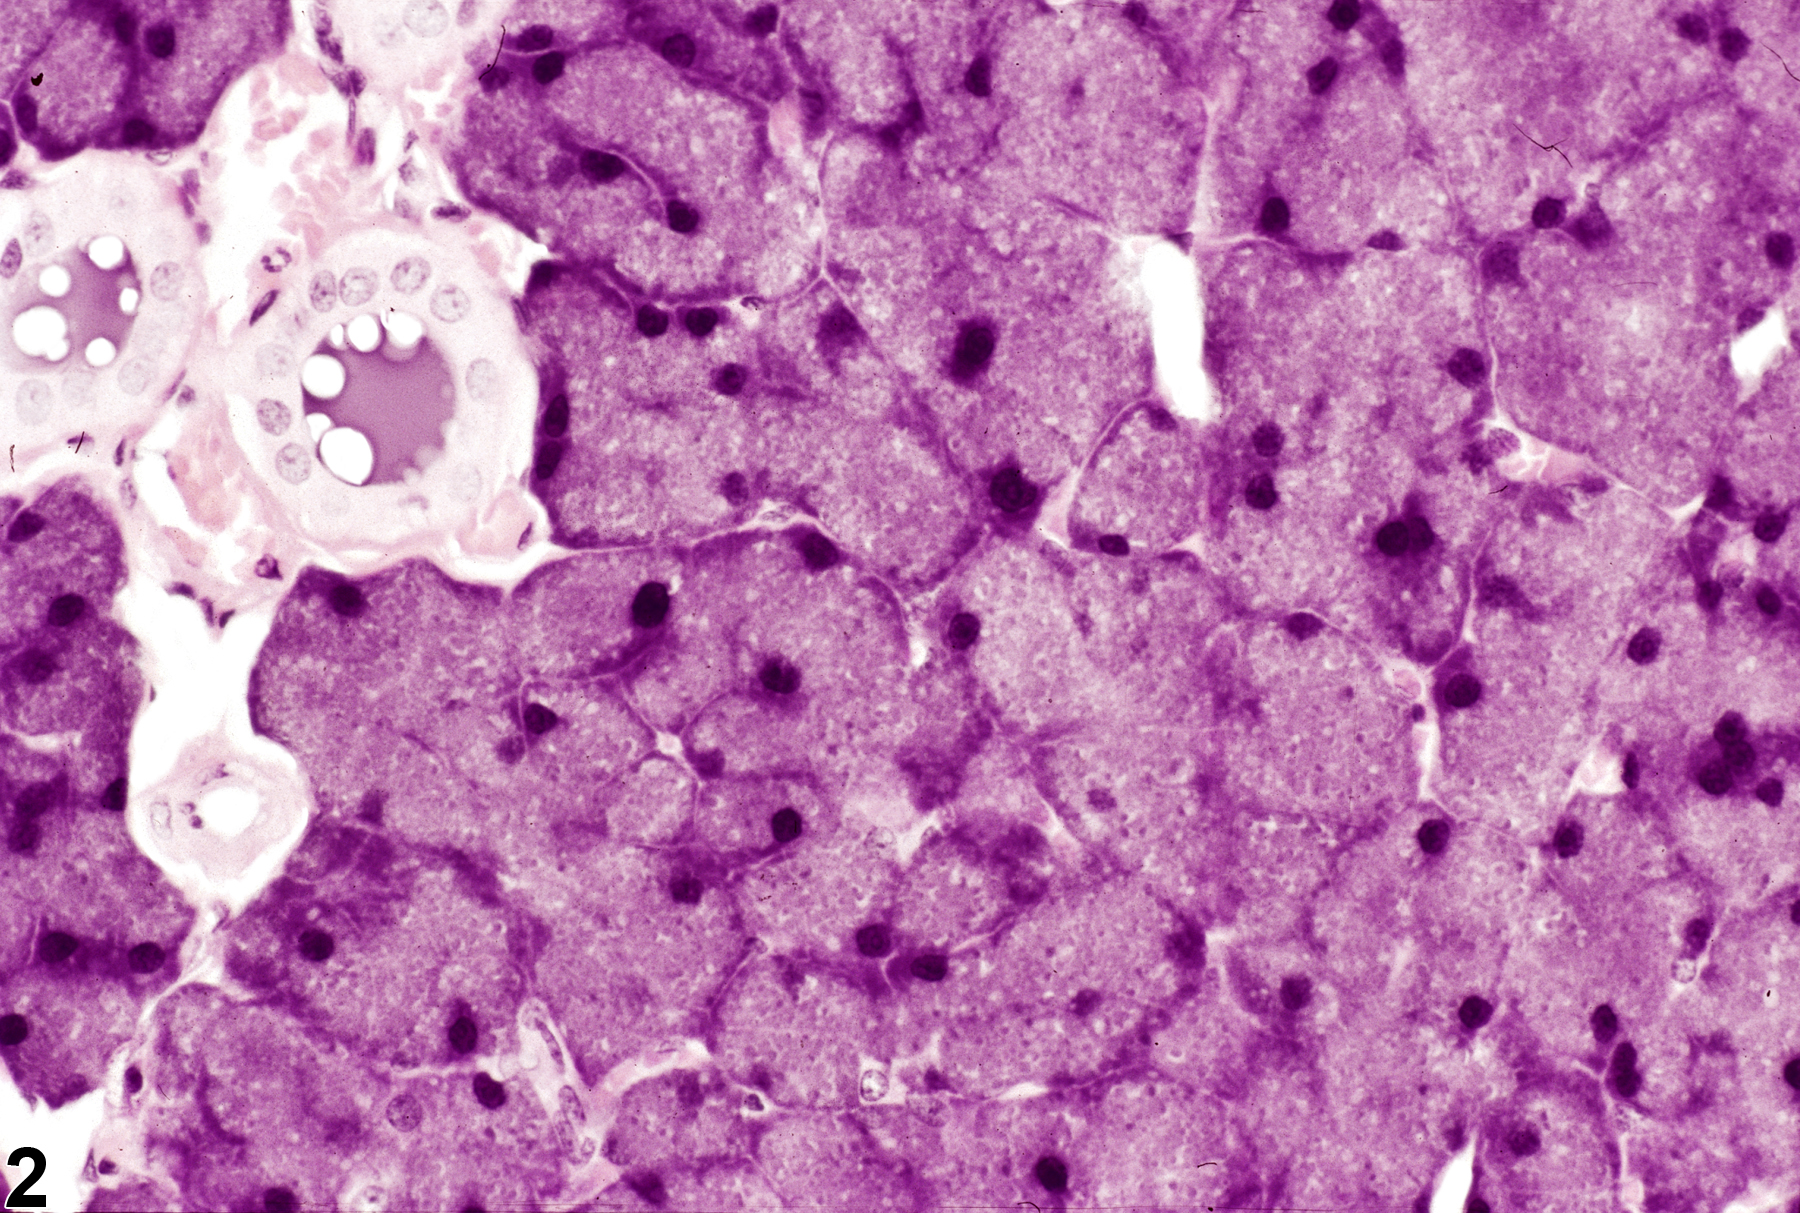 Image of hypertrophy in the parotid salivary gland acinus from a male F344/N rat in a subchronic study